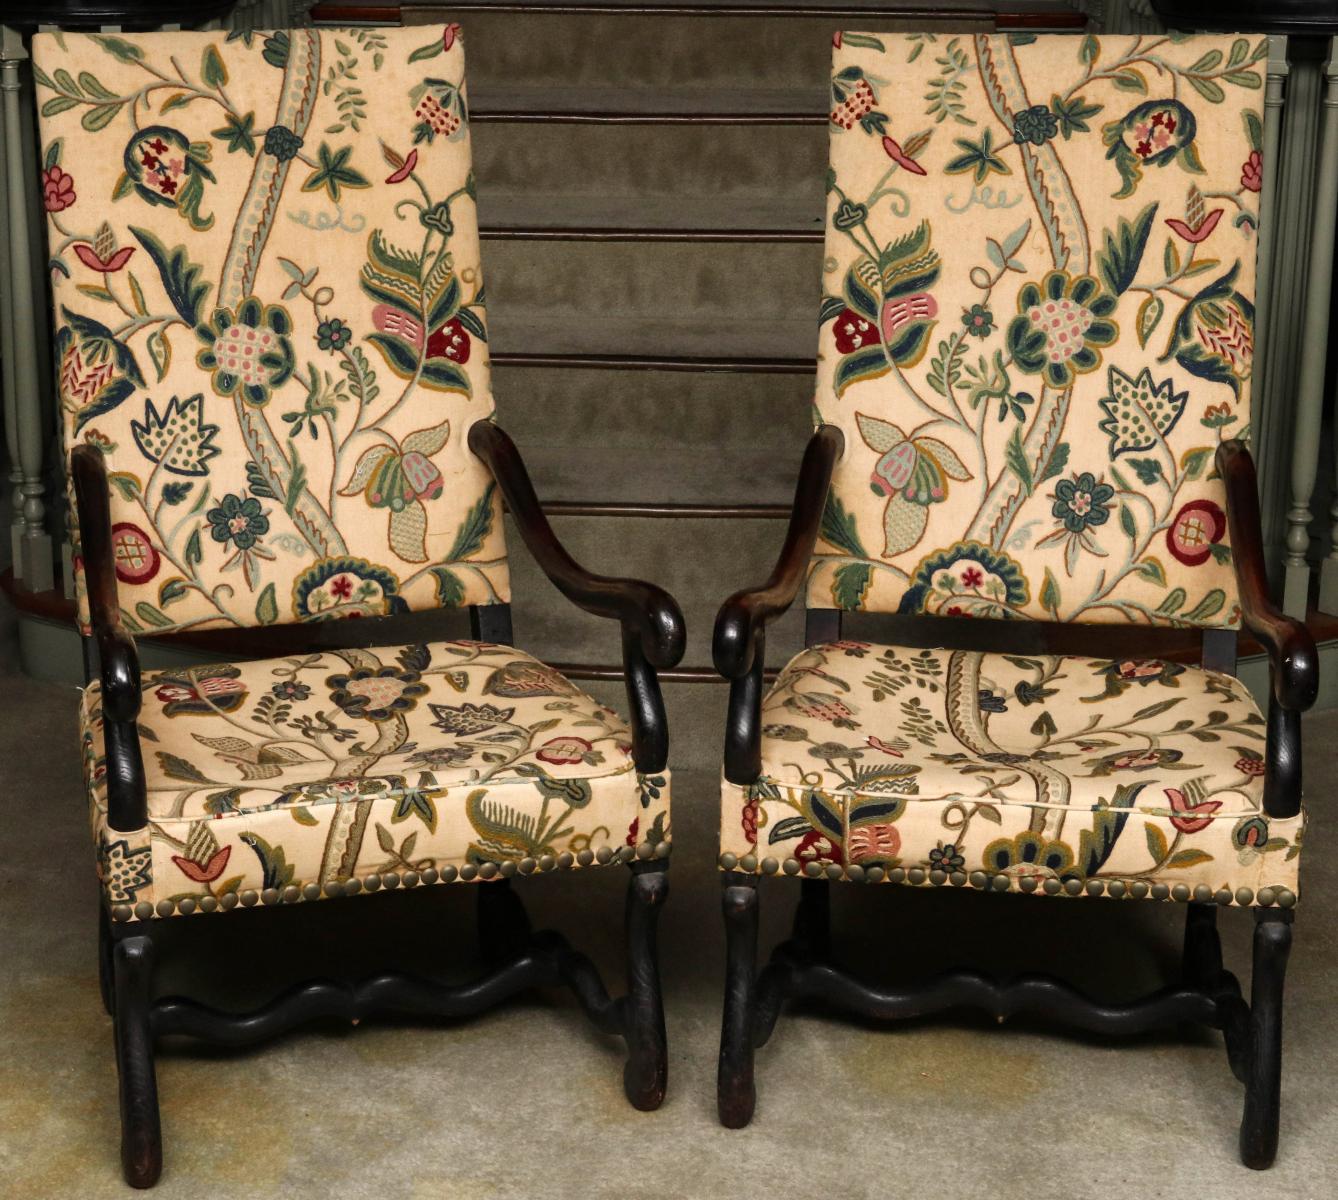 A PAIR 17TH C. FRENCH OS DE MOUTON HIGHBACK ARM CHAIRS